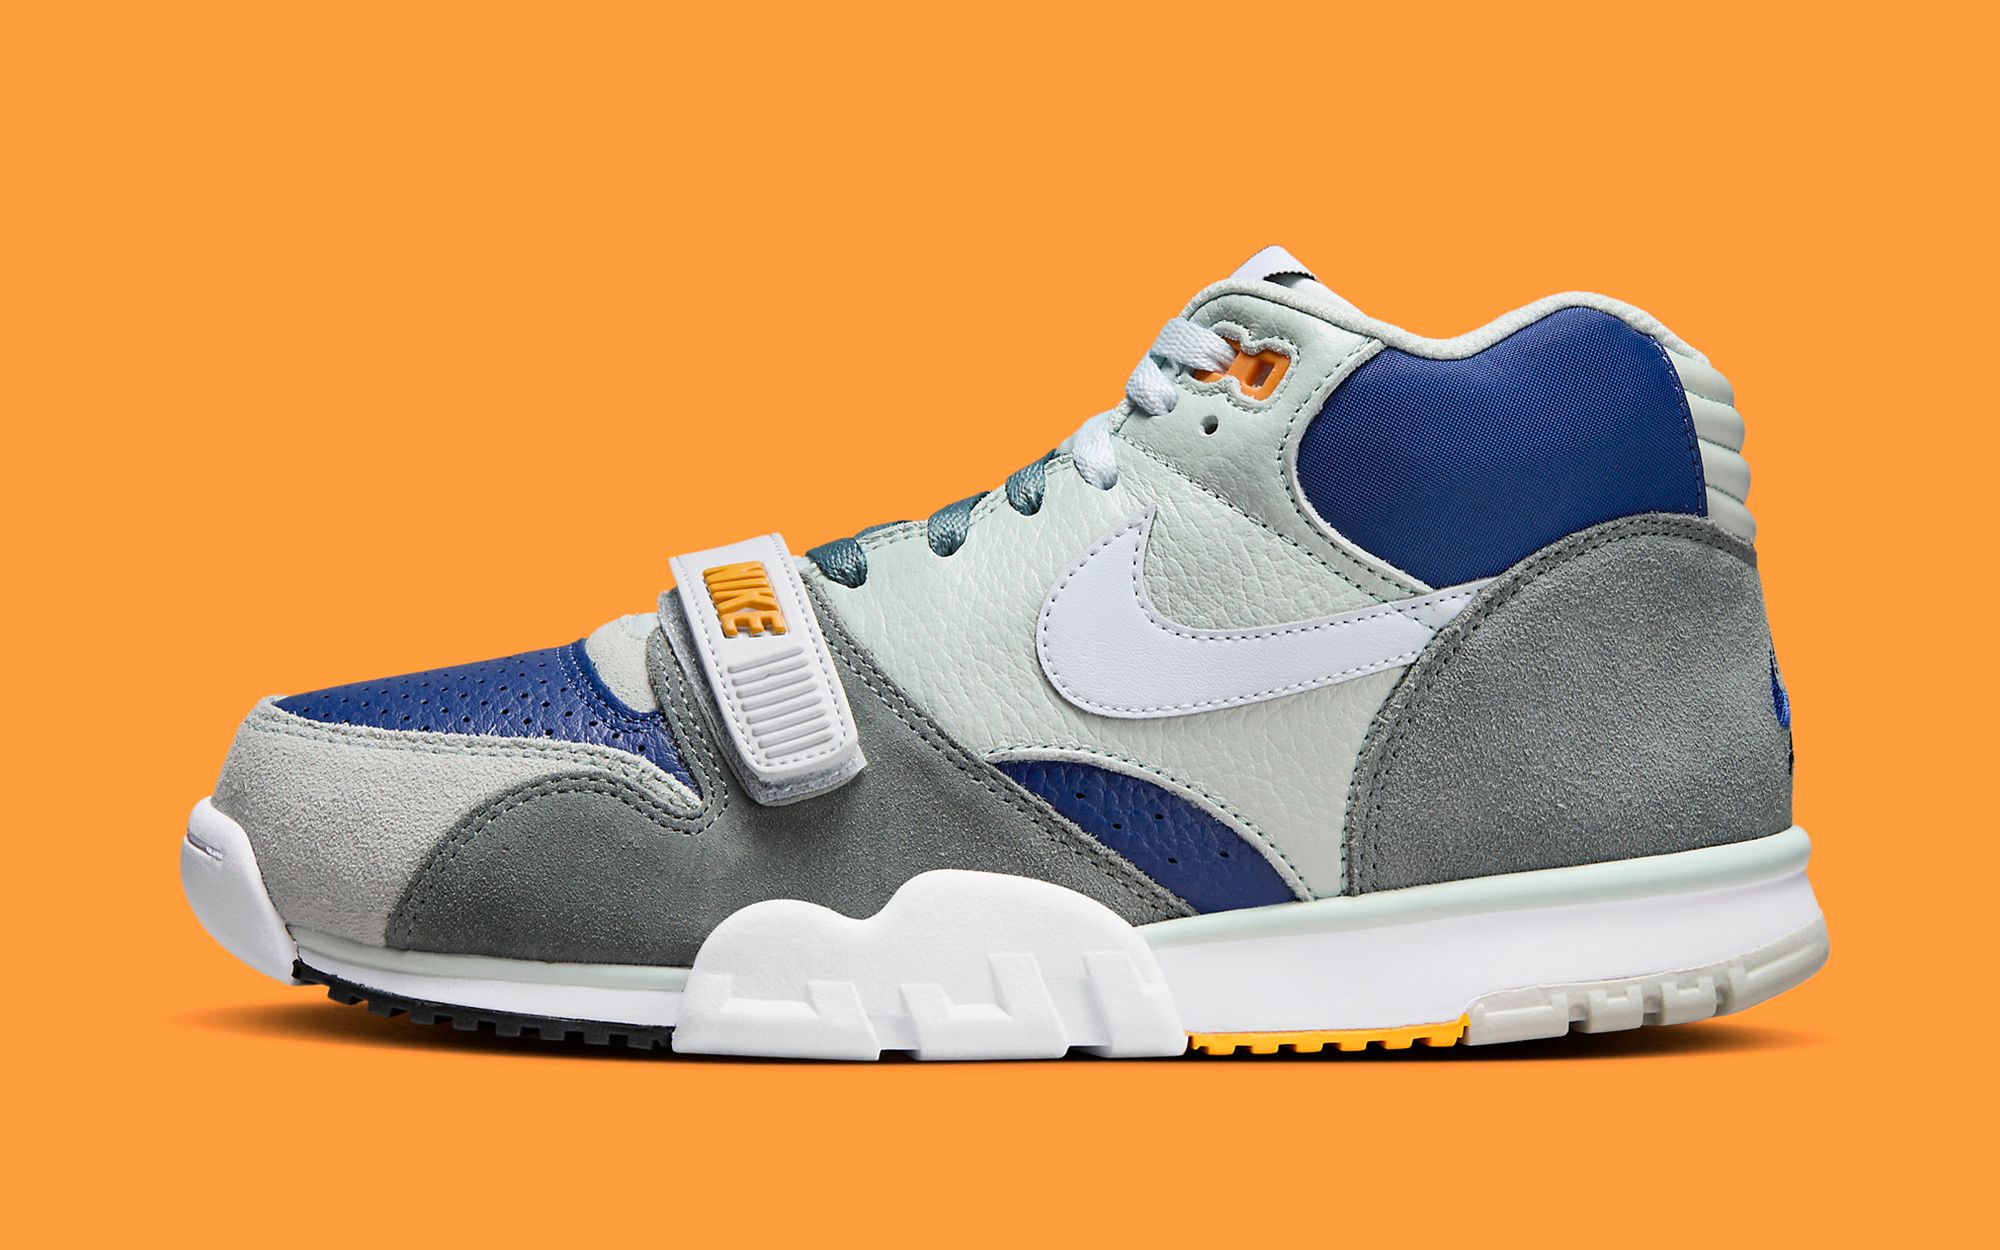 The Nike Air Trainer 1 “Split” Surfaces in Grey and Navy | House